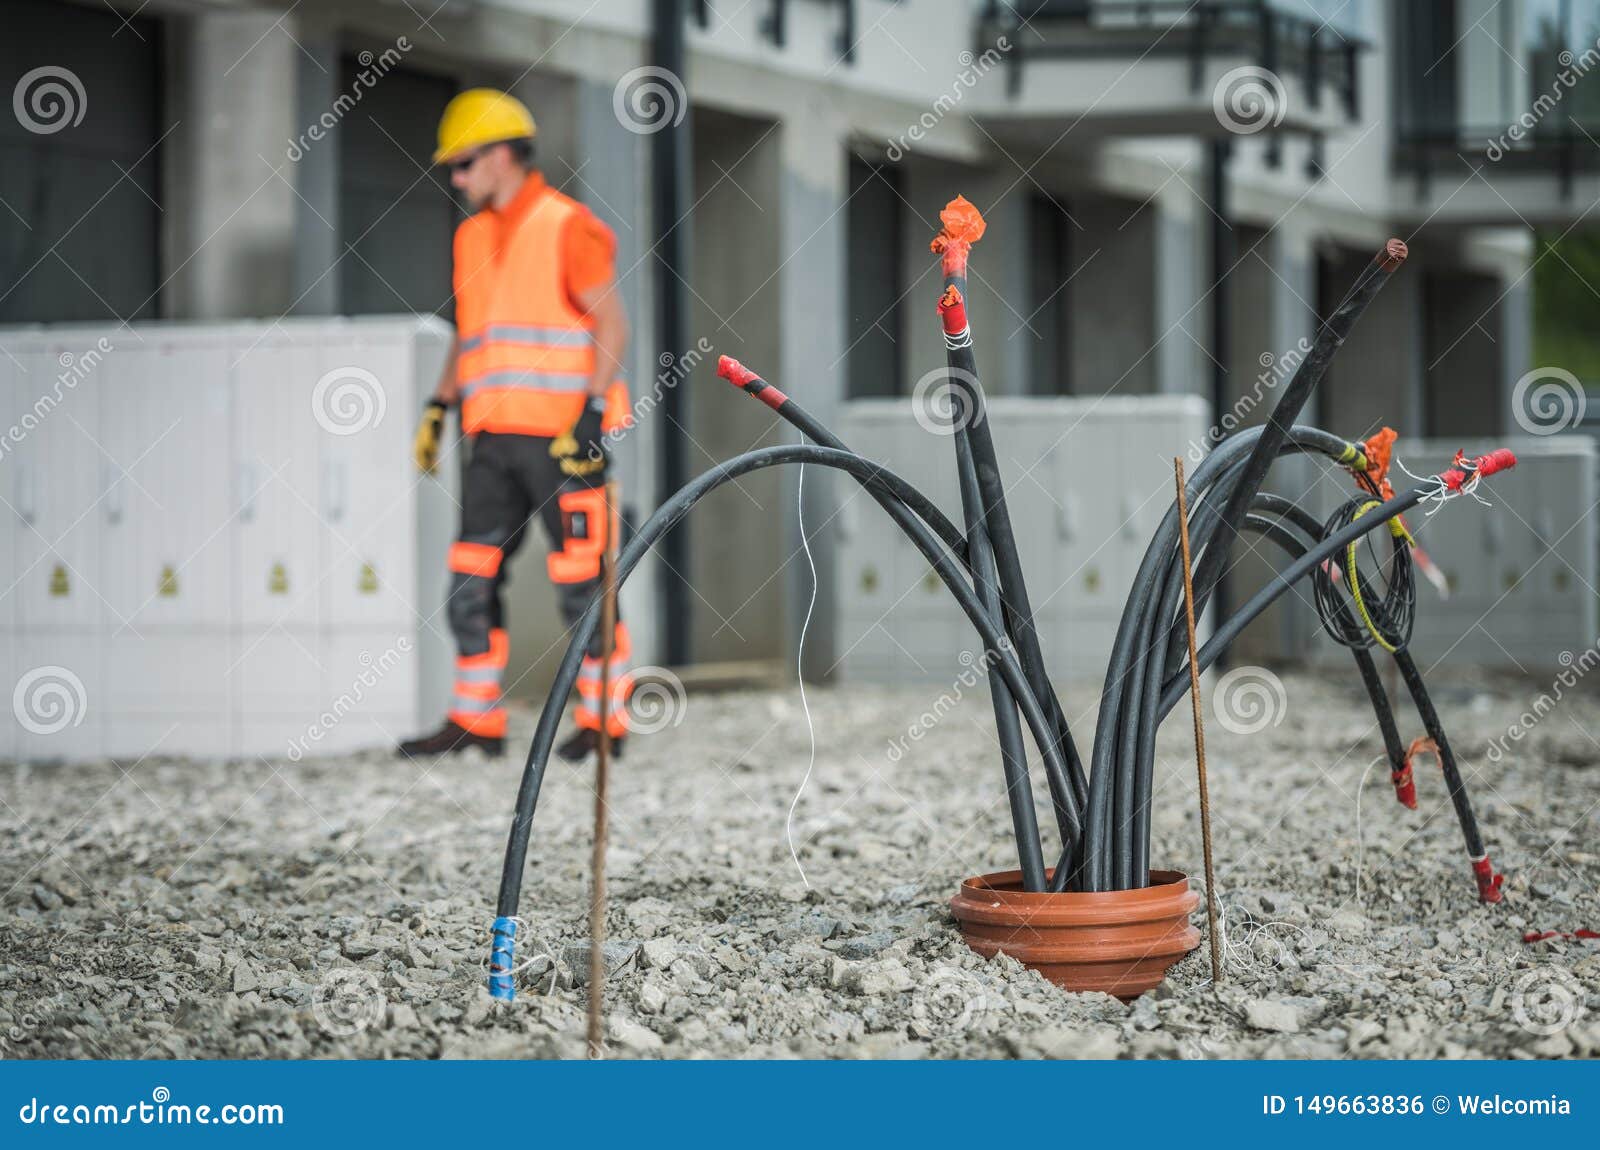 high voltage cables installation